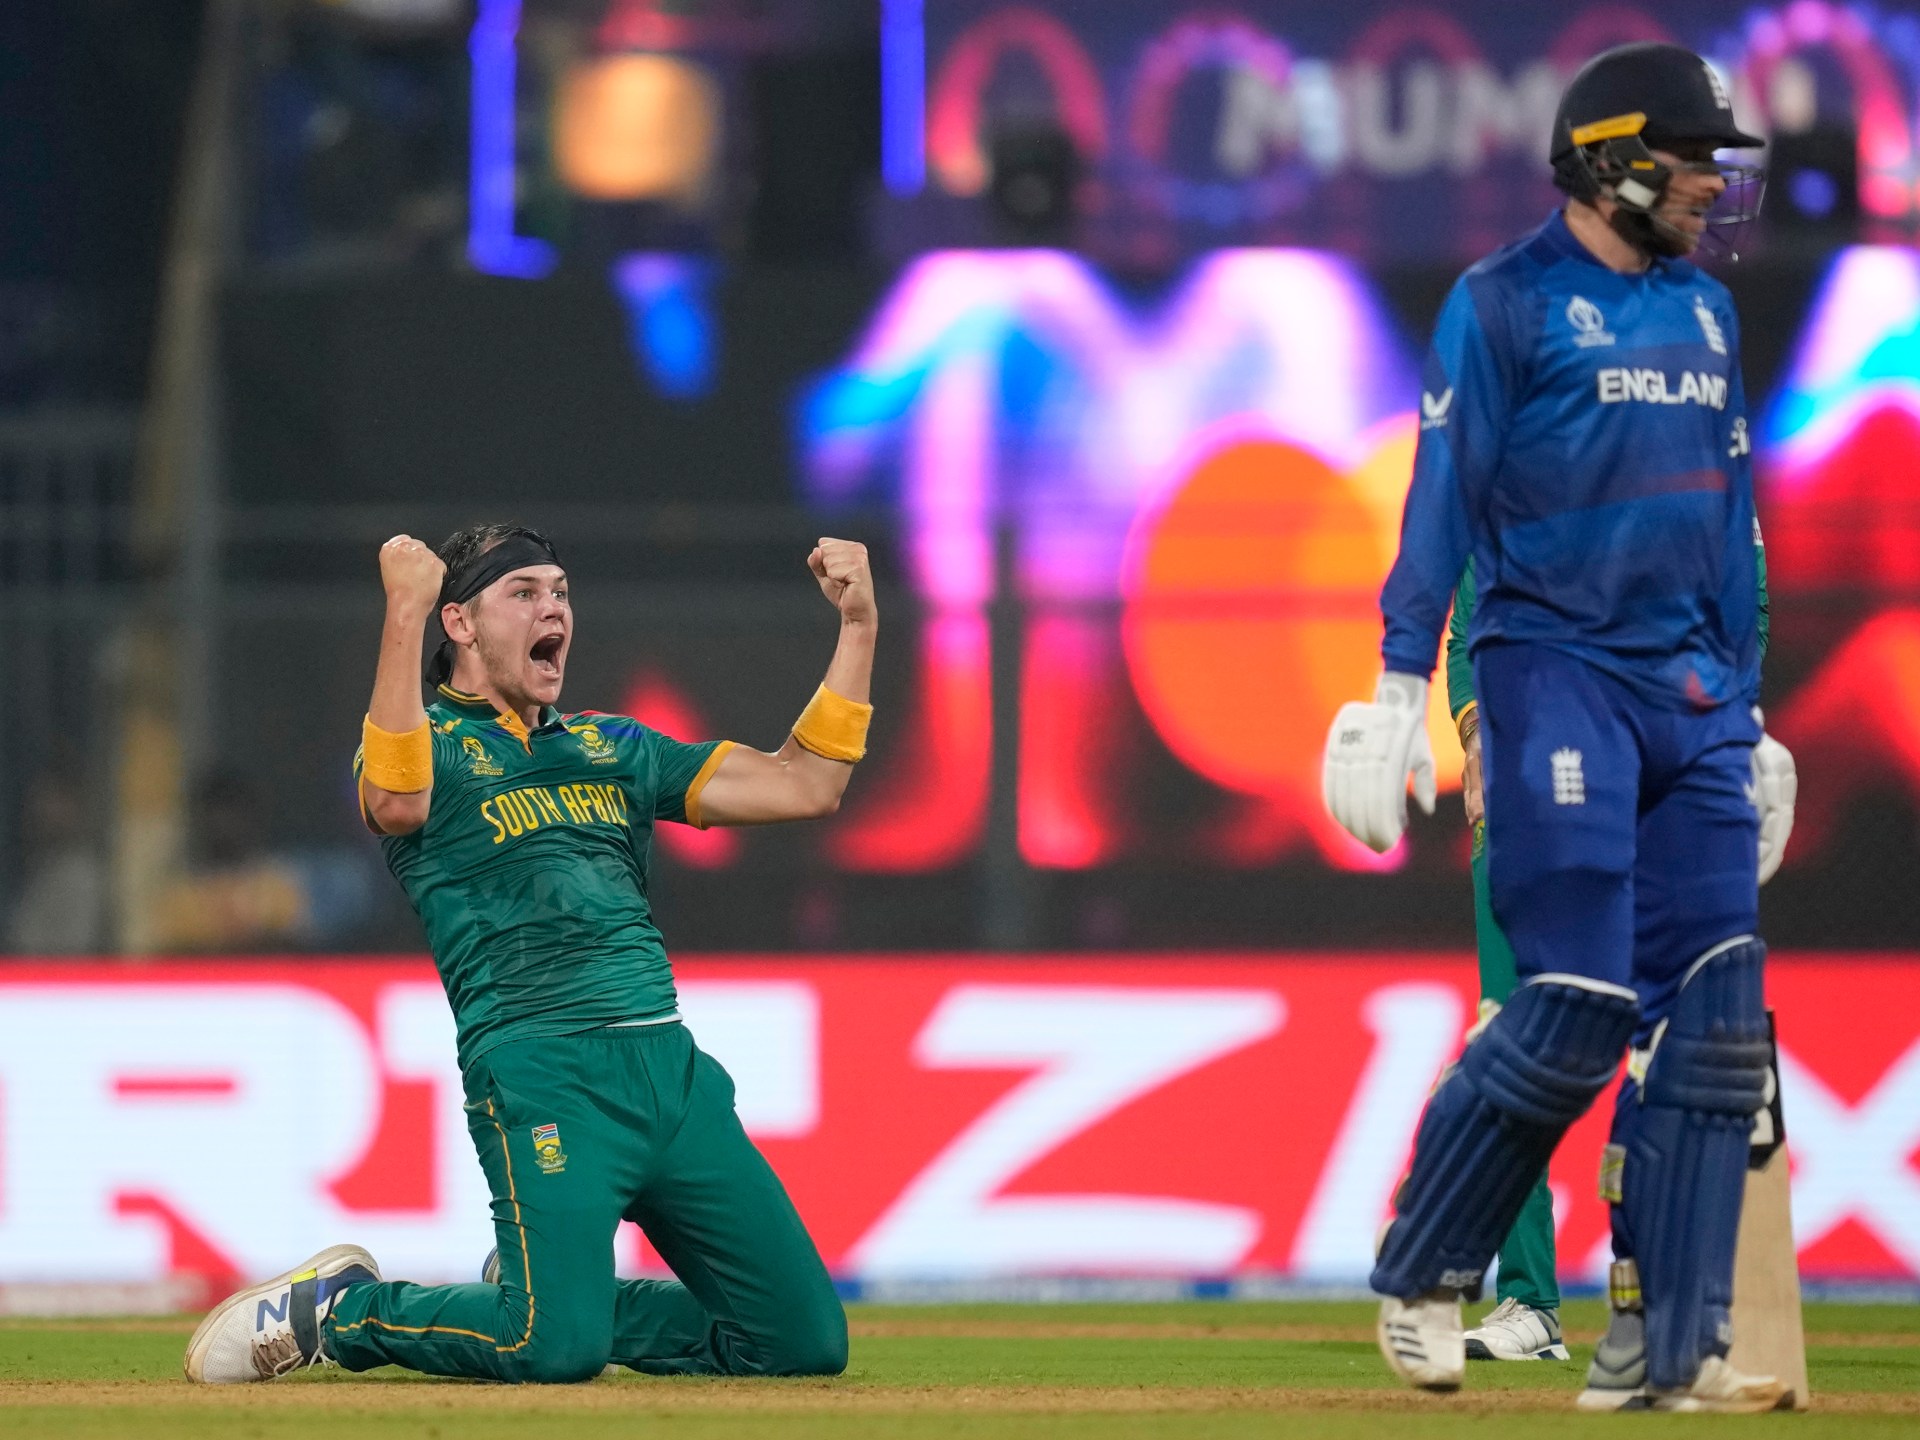 South Africa inflicts file ODI defeat on England in ICC Cricket World Cup |  ICC Cricket World Cup Information